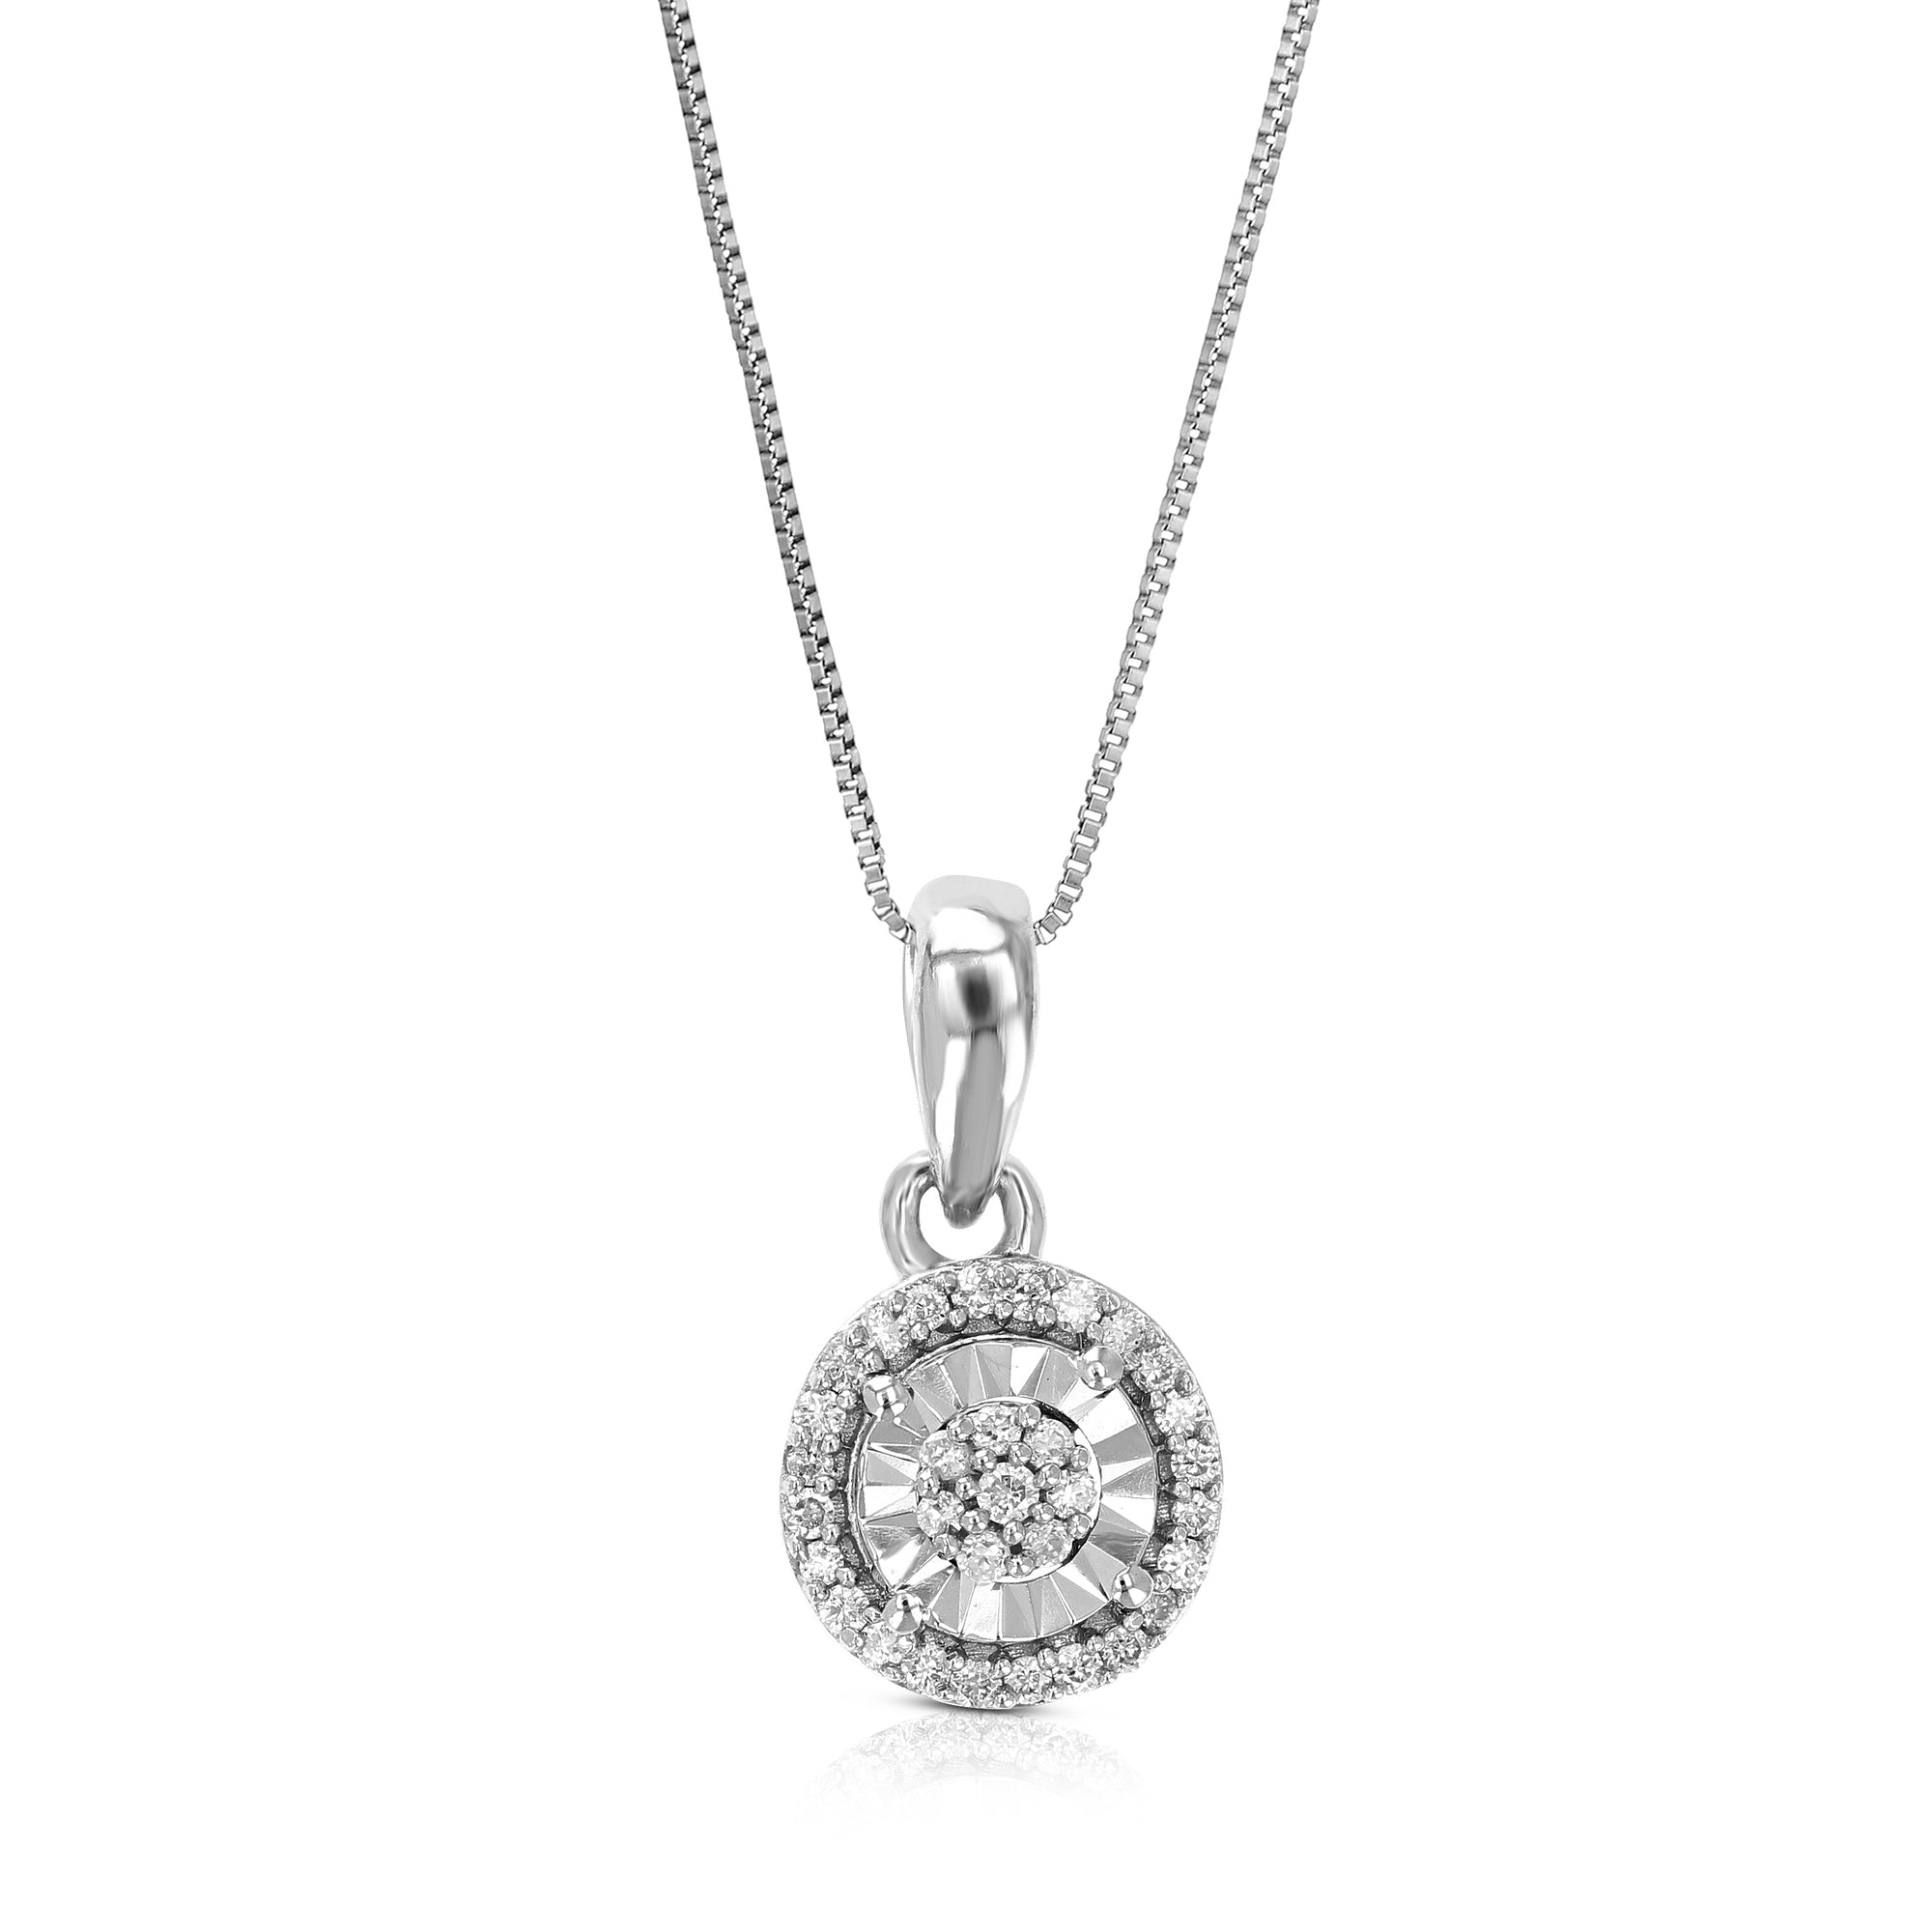 1/12 cttw Lab Grown Diamond Starburst Pendant Necklace .925 Sterling Silver 1/4 Inch with 18 Inch Chain, Size 1/2 Inch